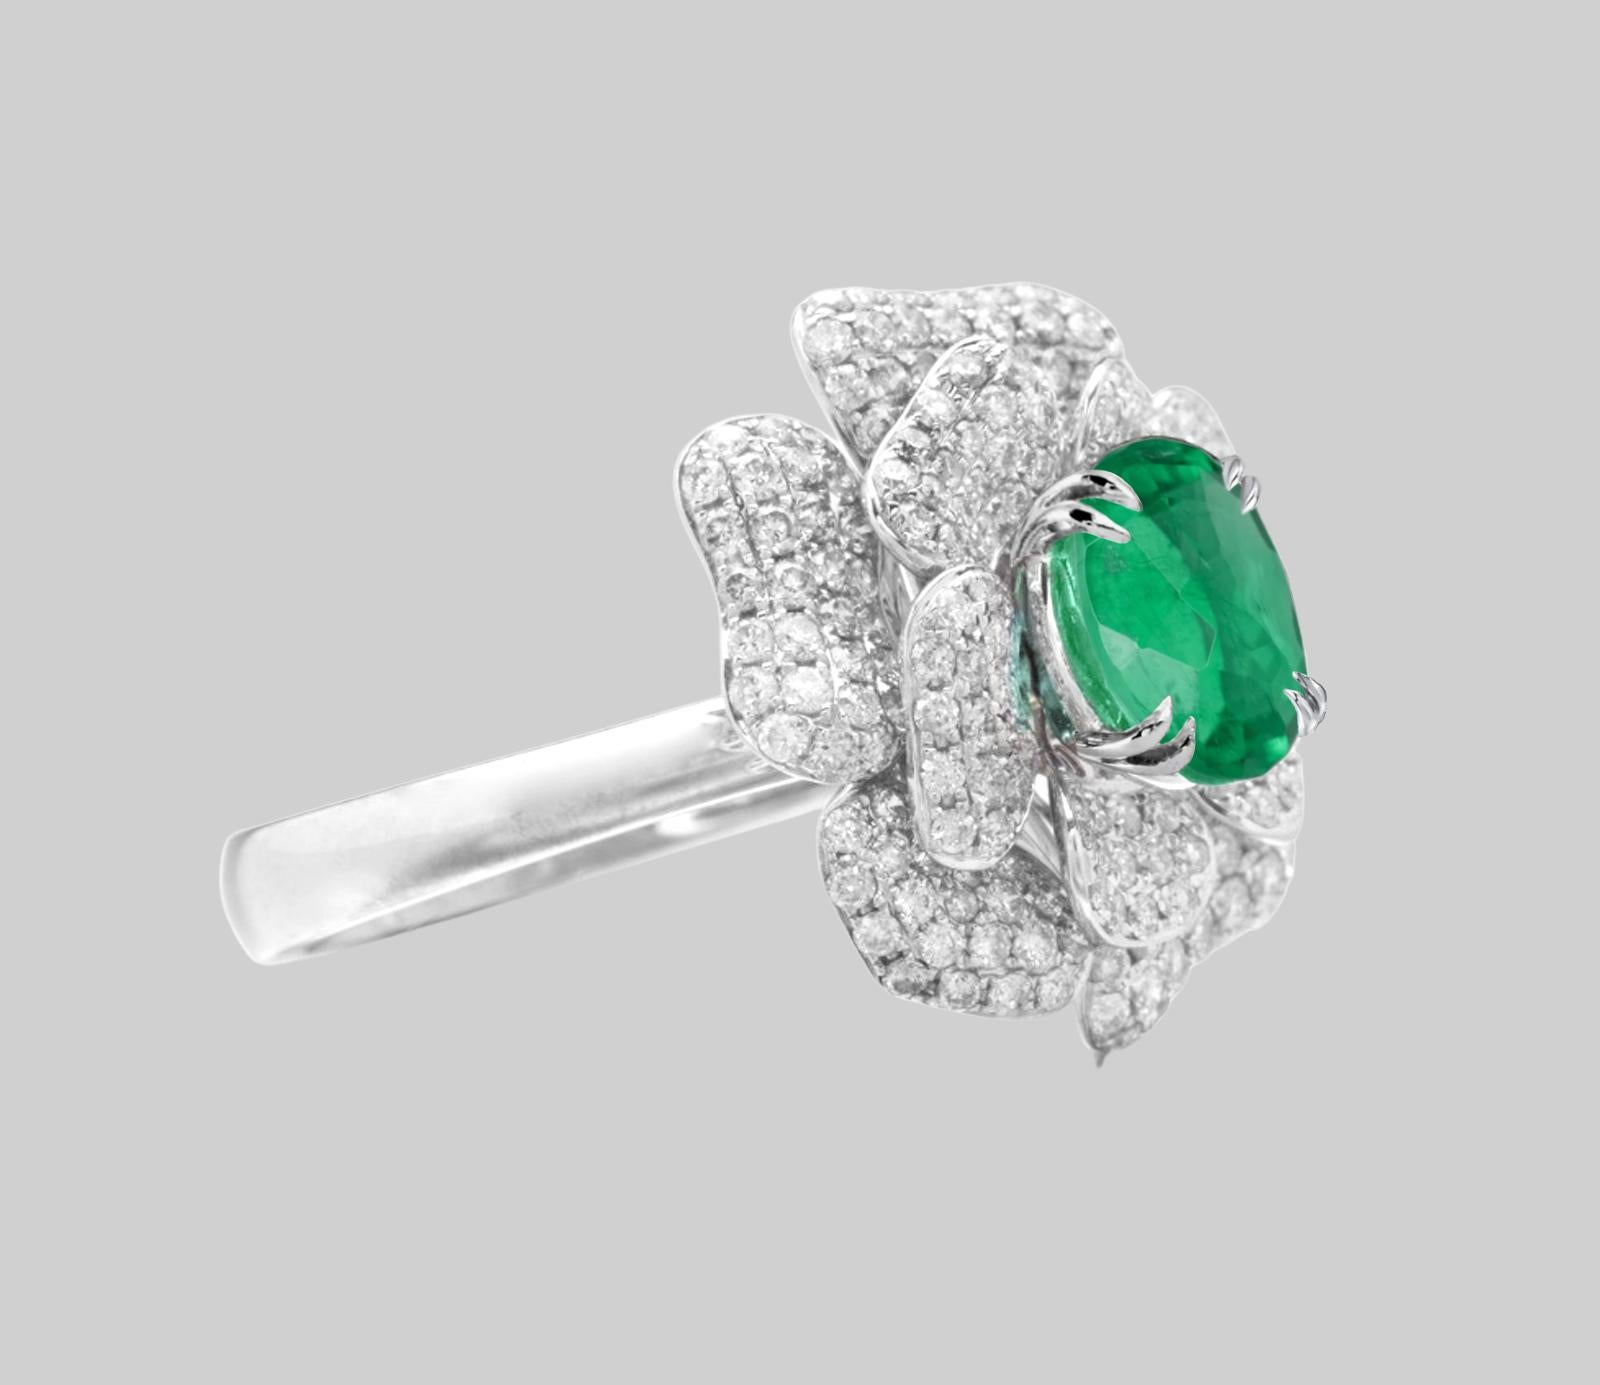 ELEGANT Colombian EMERALD AND DIAMOND RING 

This marvelous cocktail ring with exquisite pave of diamonds and set in platinum ring has a Rare  Colombian Emerald weighing 3.30 carats

 The real eye catcher is the gorgeous emerald that is surrounded